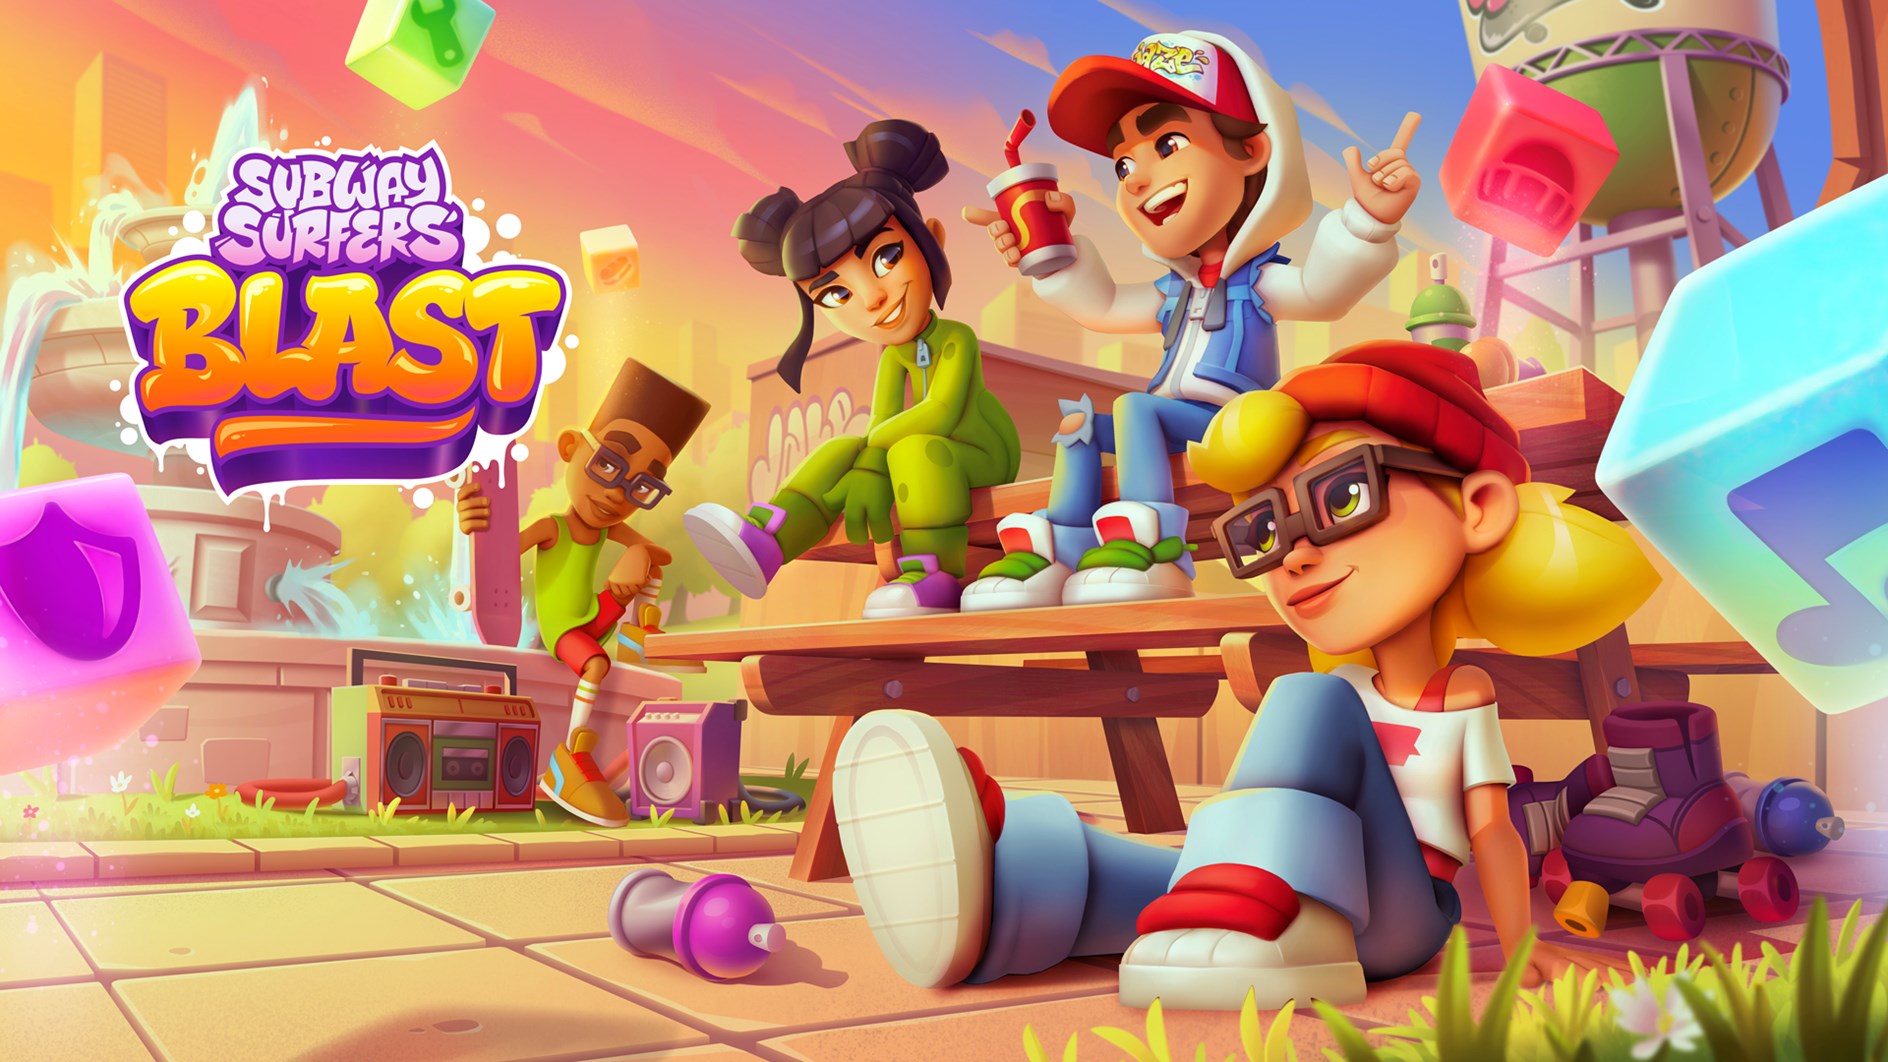 Subway Surfers official promotional image - MobyGames